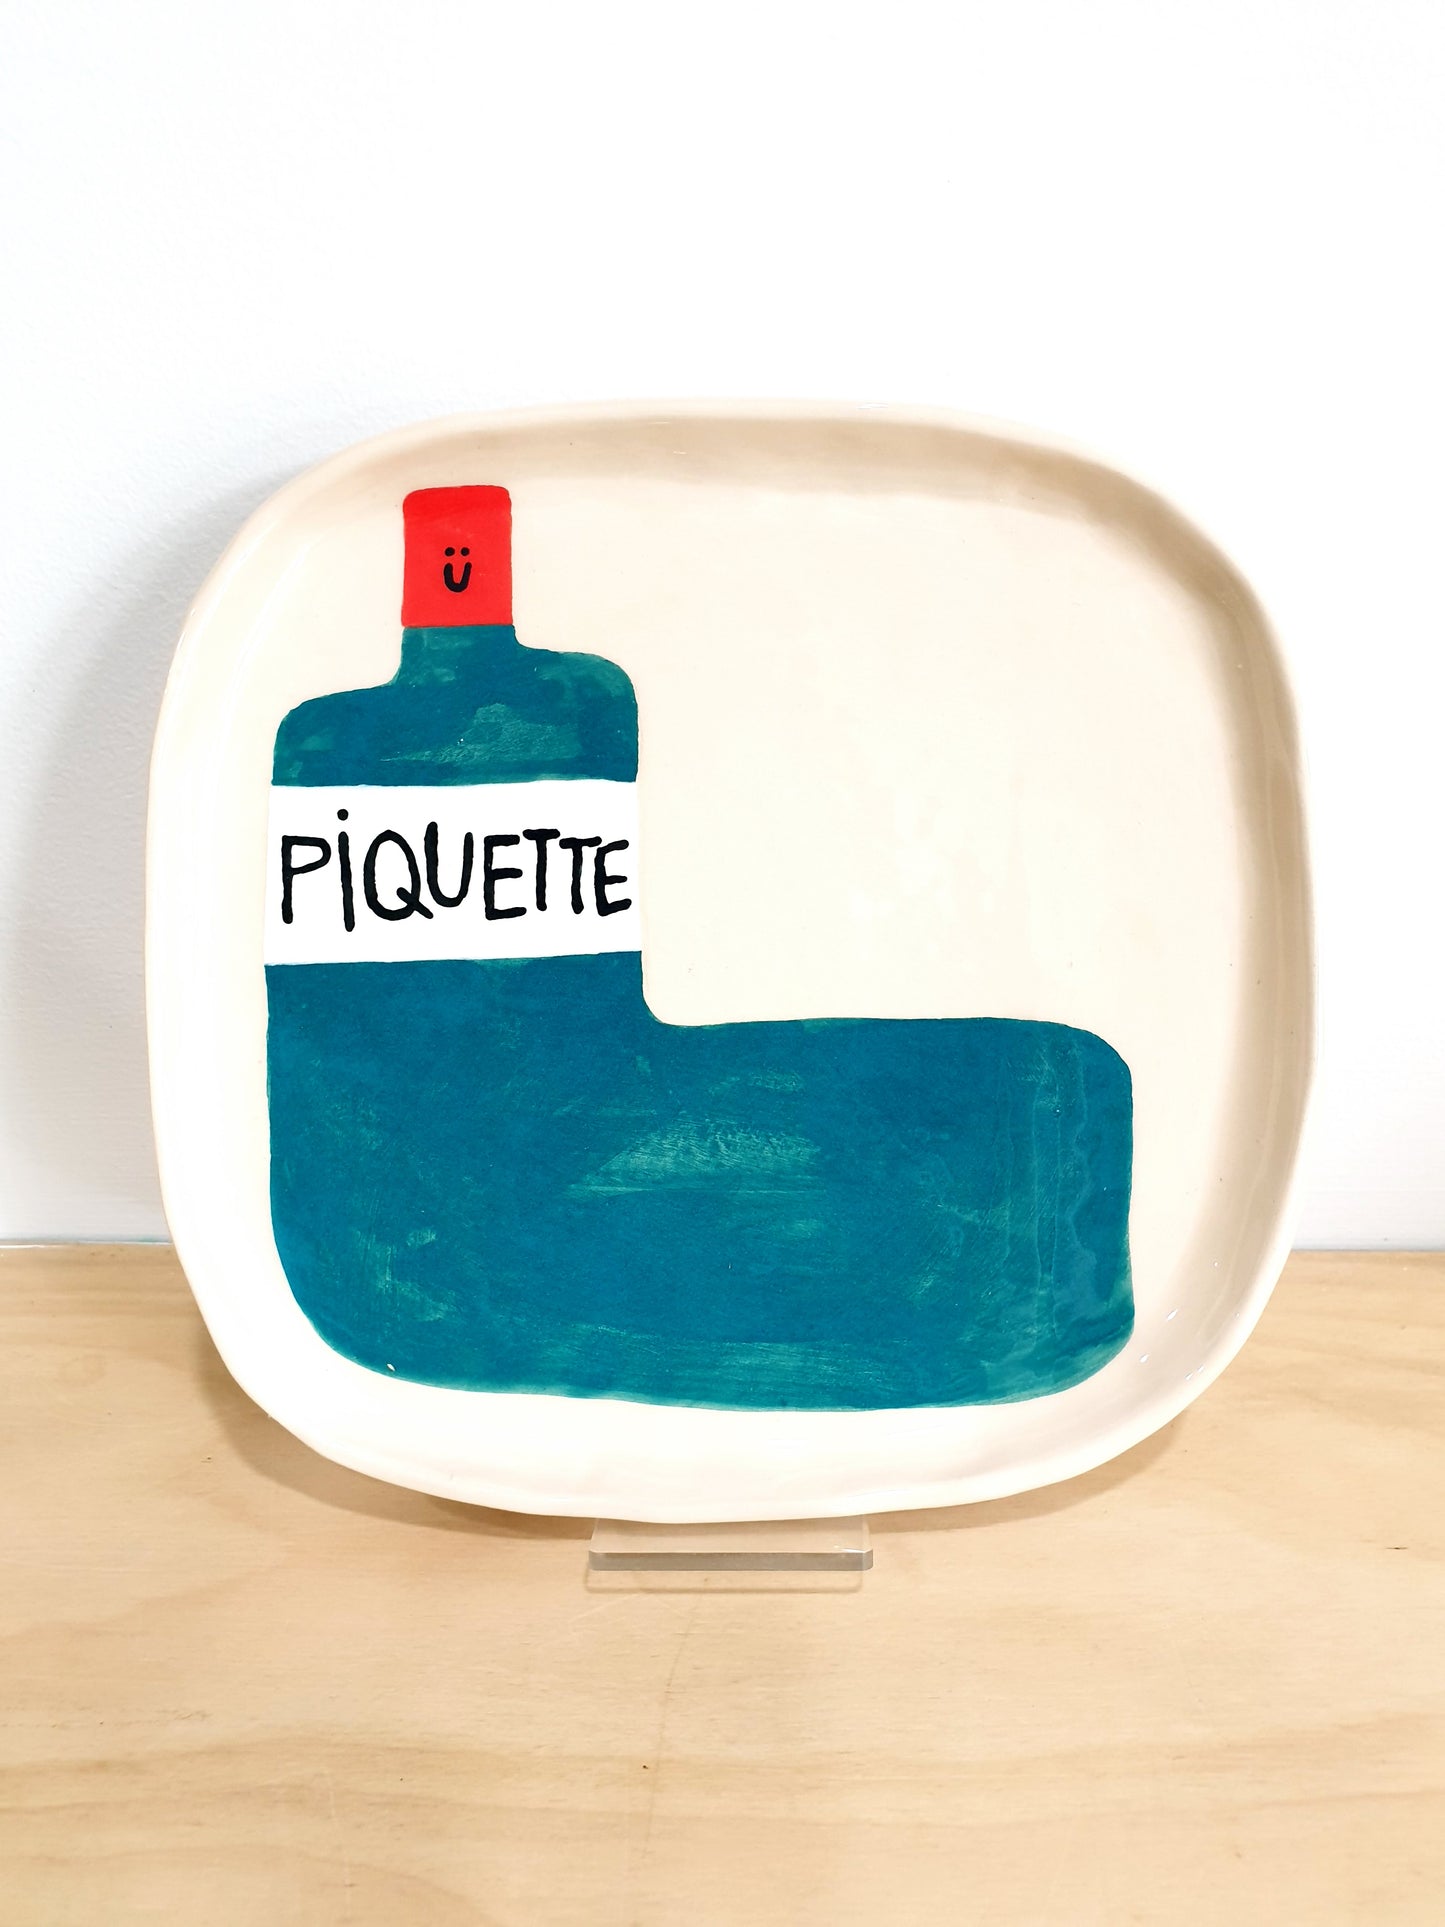 Happy Piquette (cheap wine!)  - Happy Things Plate